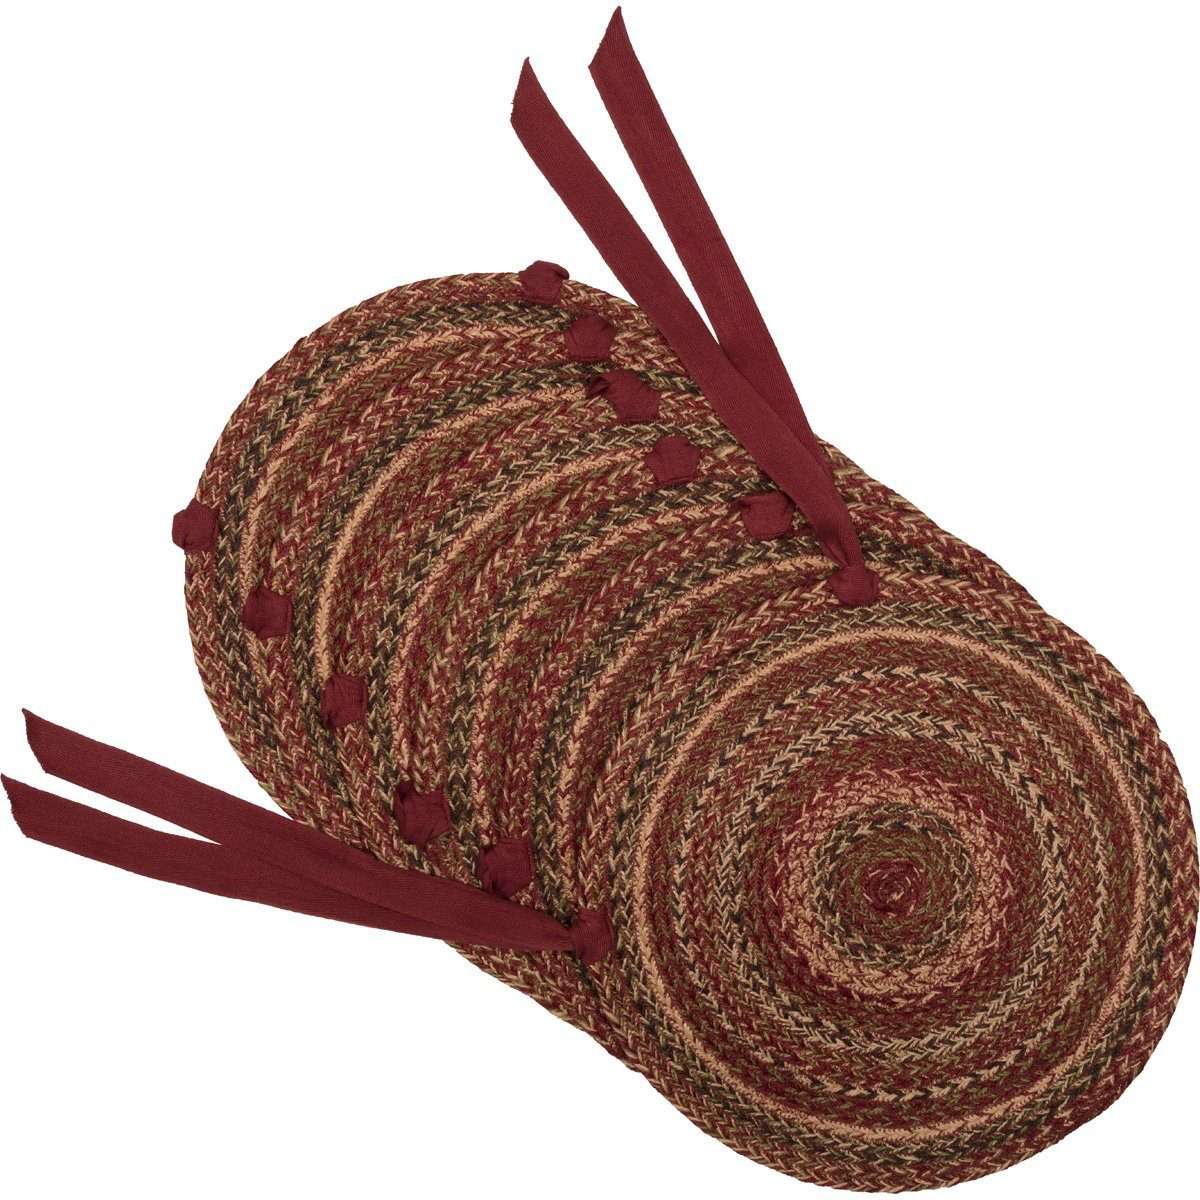 Cider Mill Jute Braided Chair Pad Set of 6 Burgundy, Natural, Green Chair Pad VHC Brands 